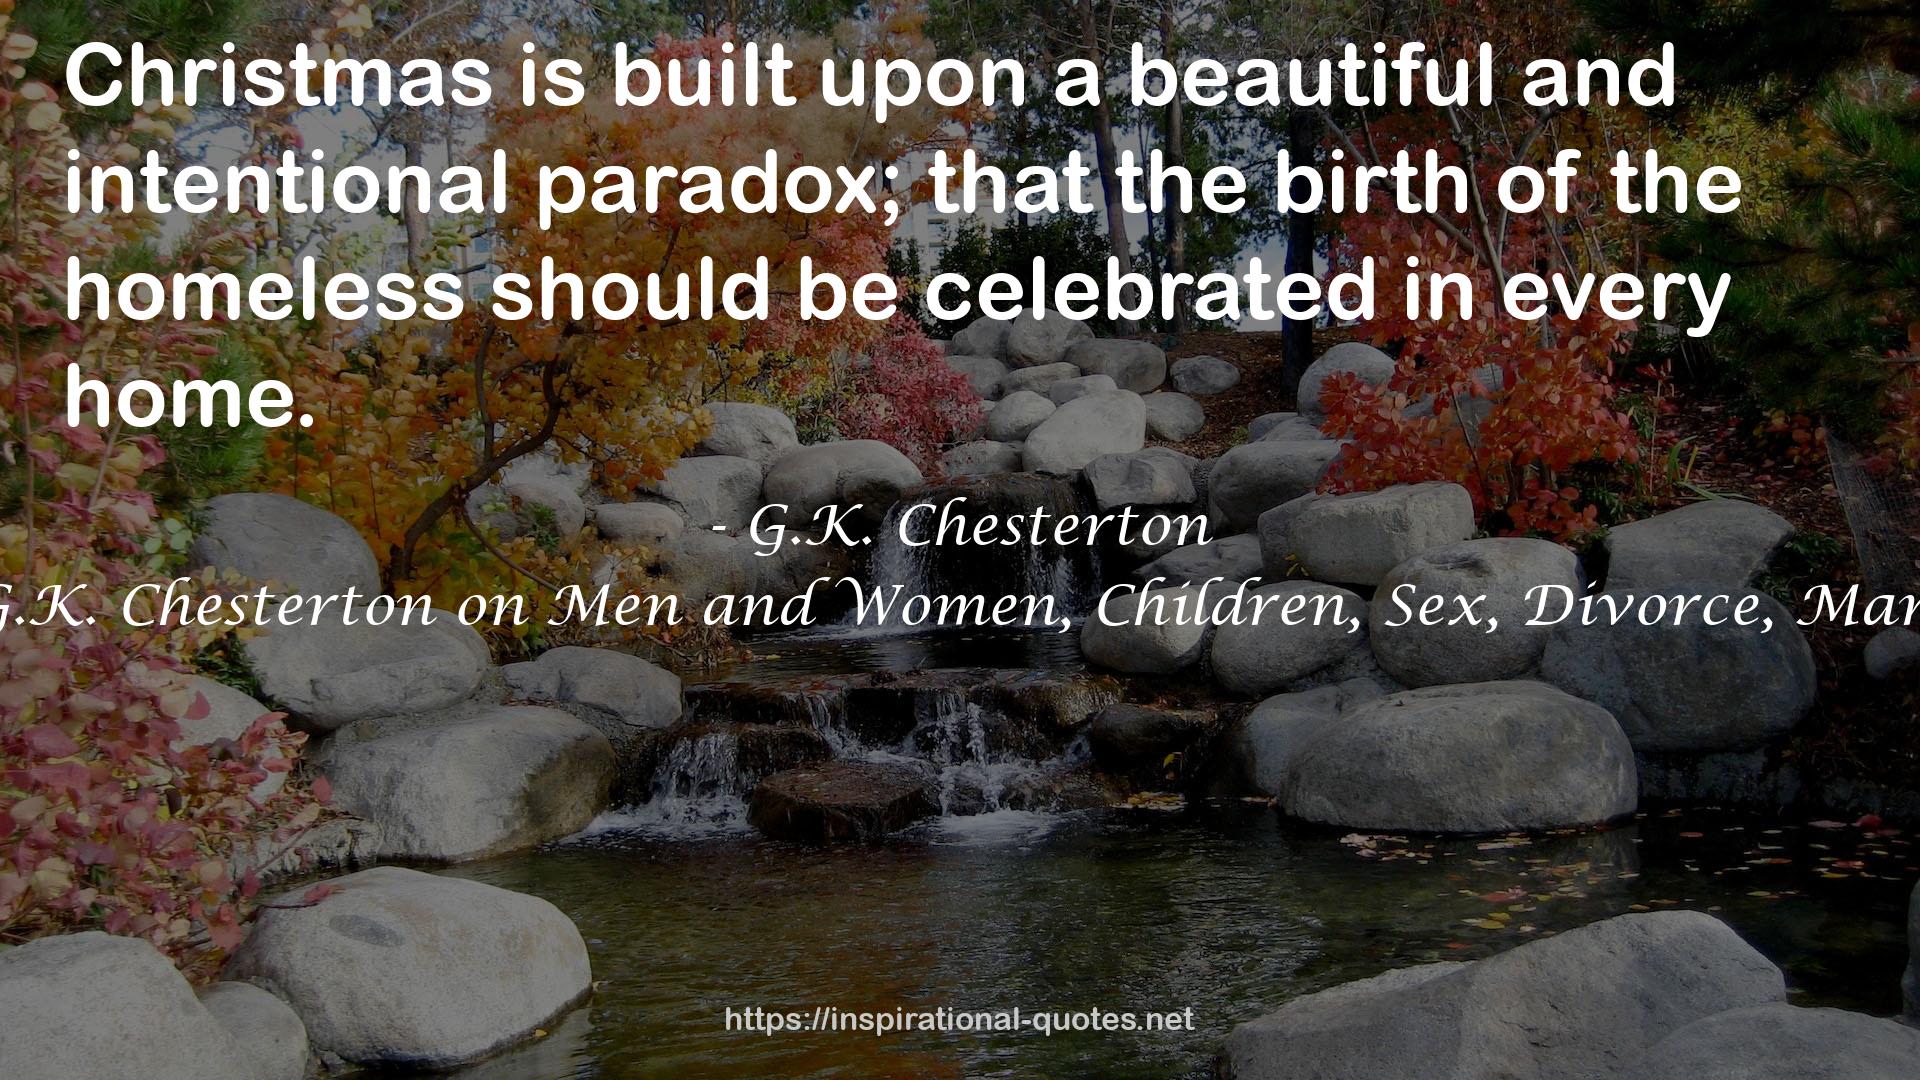 Brave New Family: G.K. Chesterton on Men and Women, Children, Sex, Divorce, Marriage and the Family QUOTES